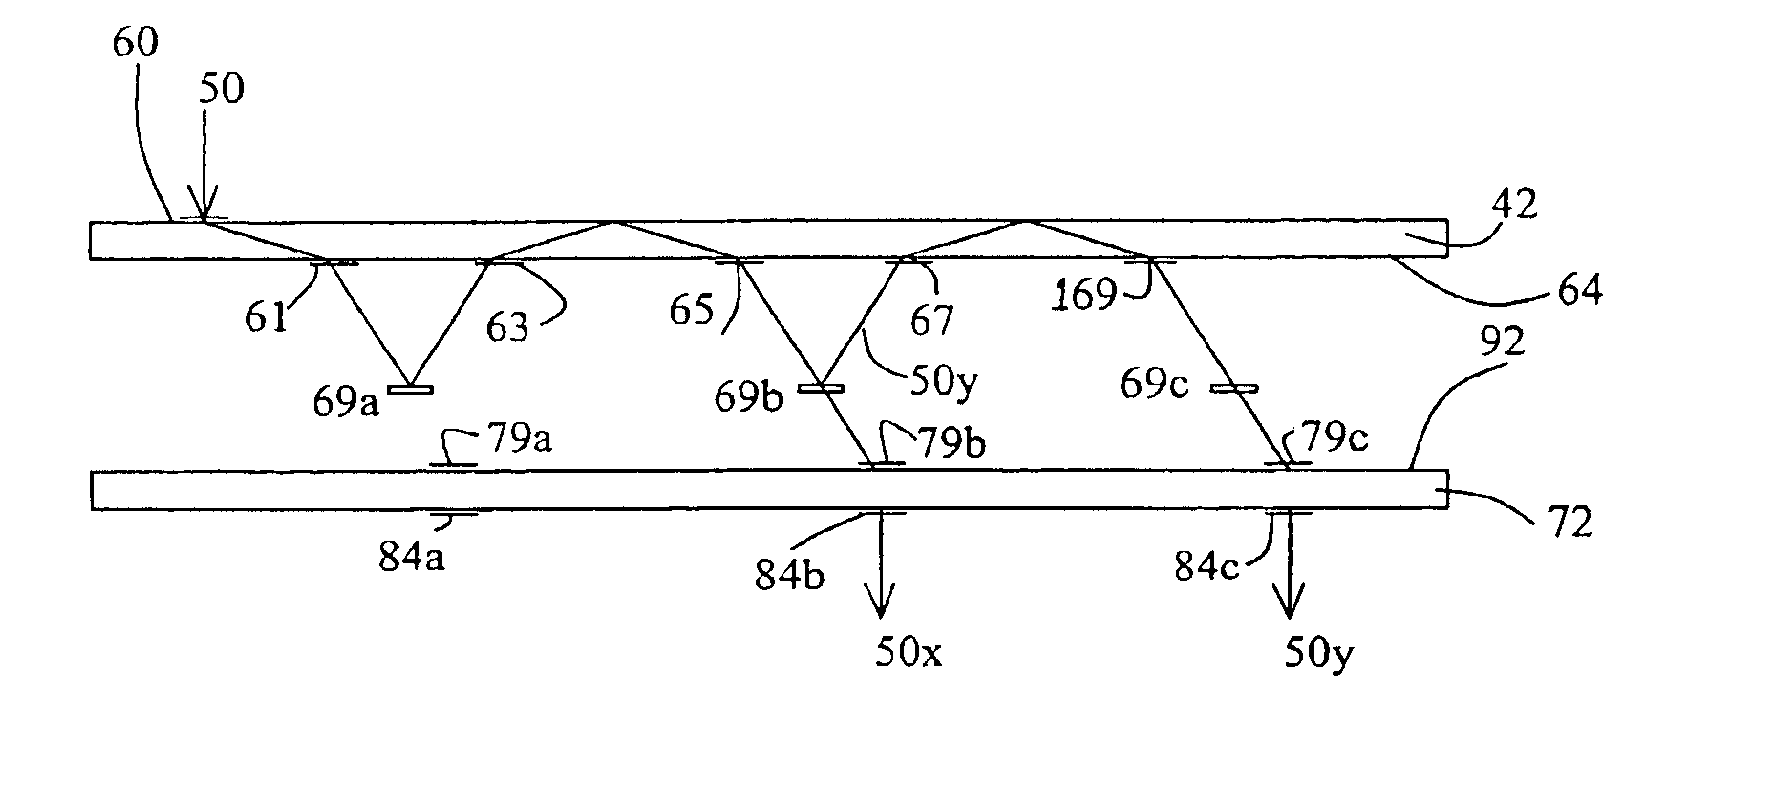 Compact dynamic crossbar switch by means of planar optics